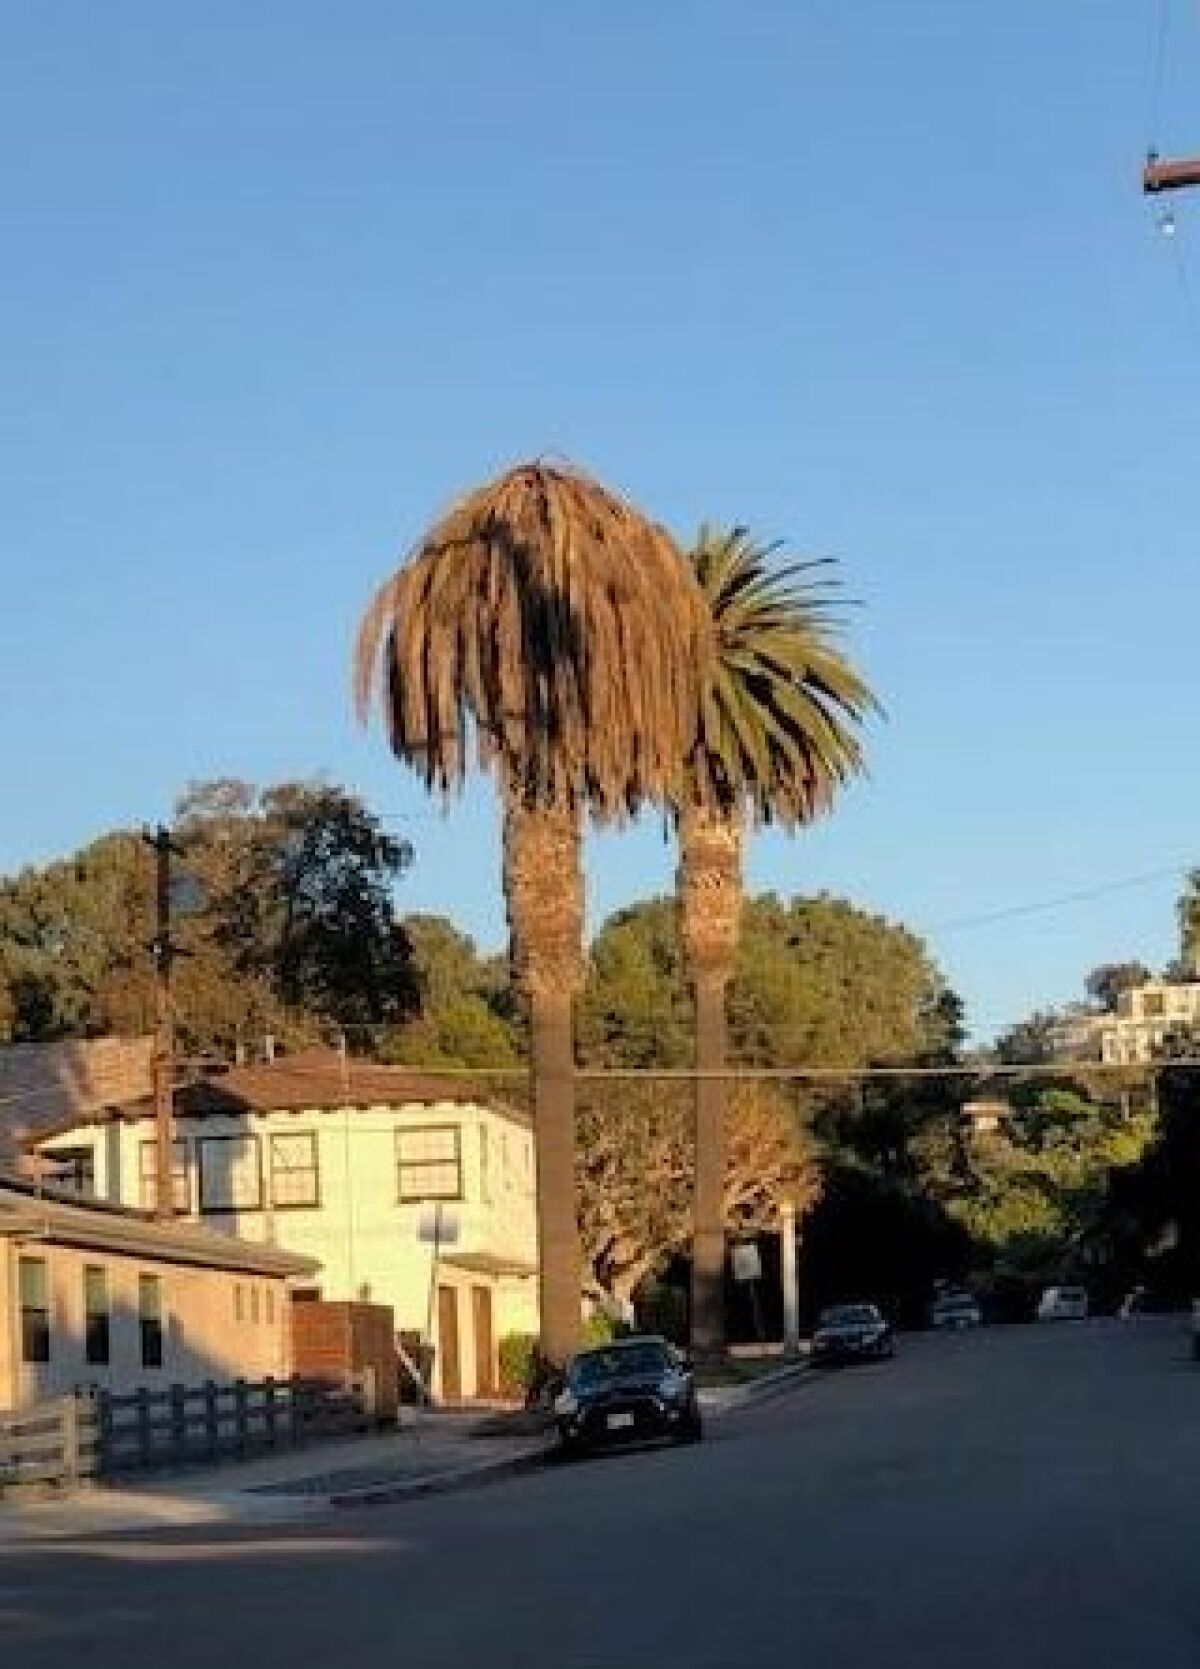 Several palm trees in La Jolla appear to be dying due to a weevil infestation happening throughout San Diego.